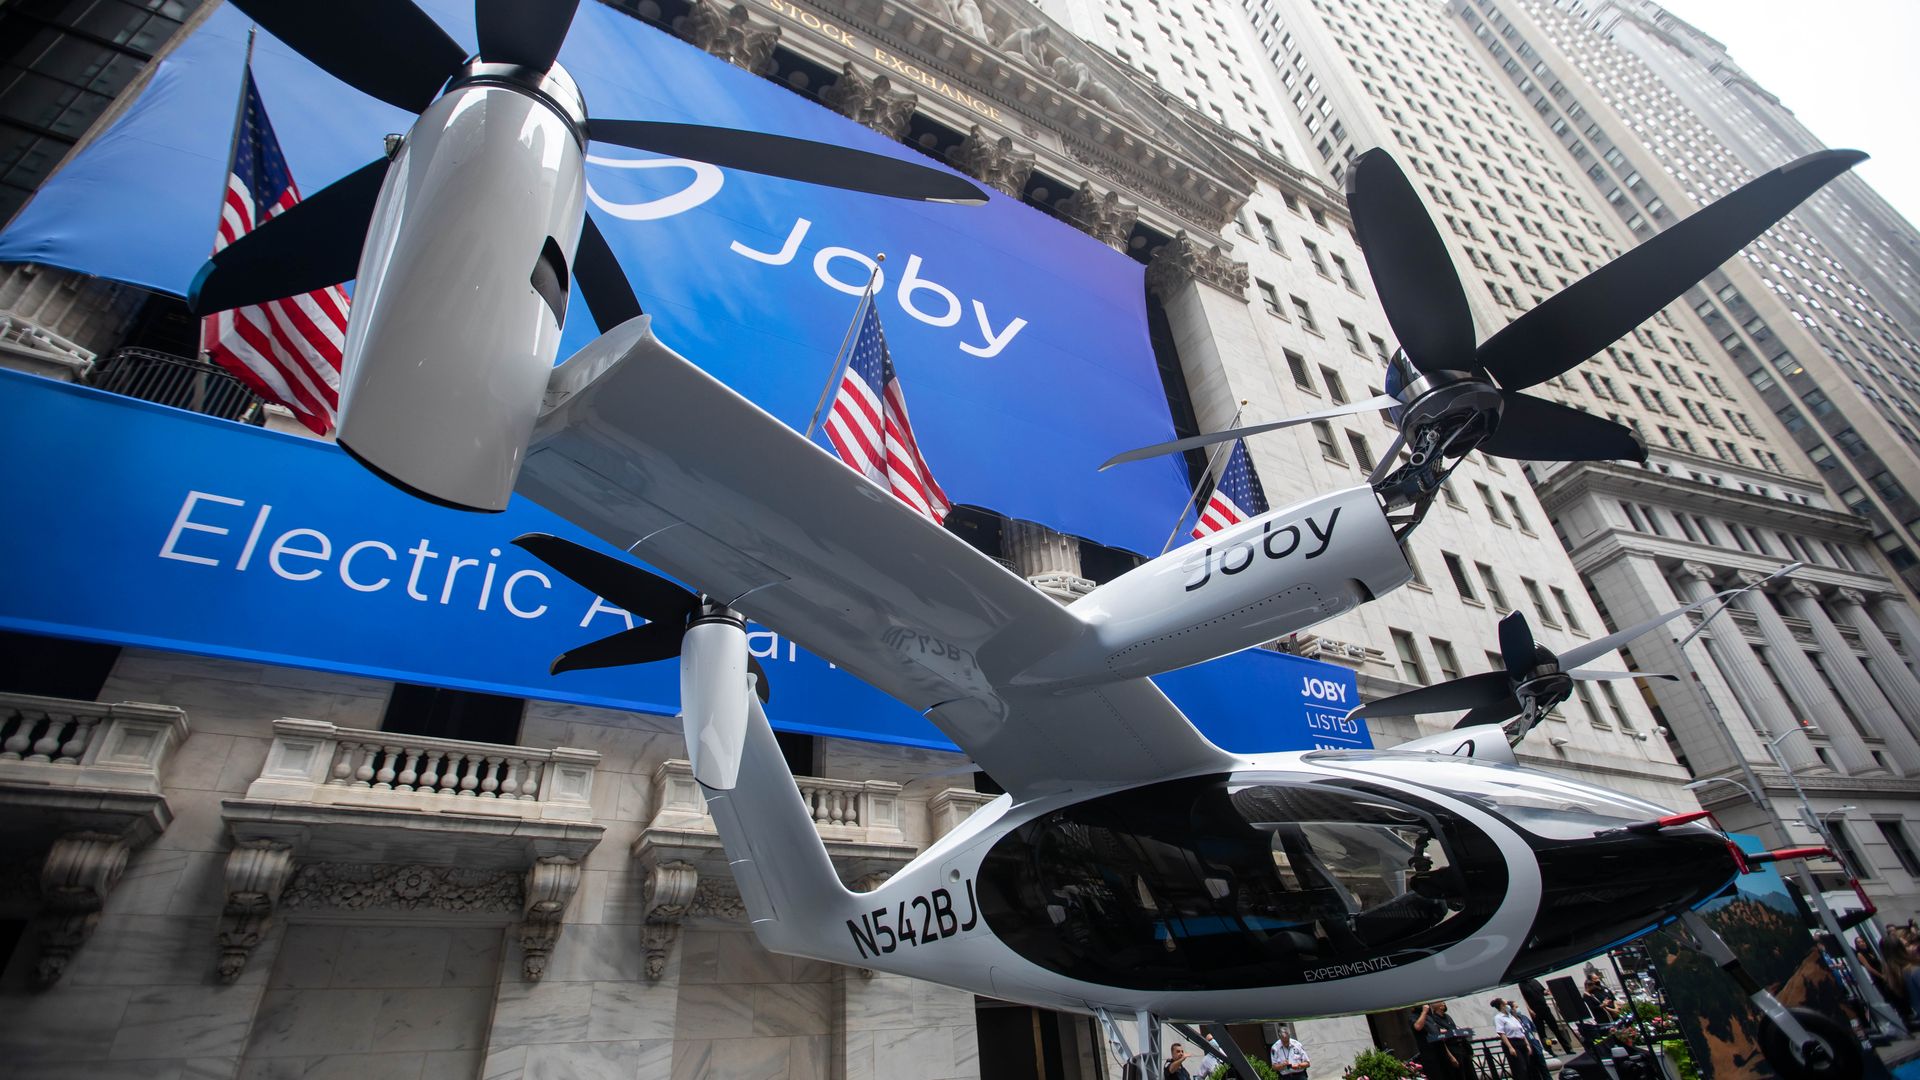 A multi-rotor Joby Aviation aircraft sits on display outside the New York Stock Exchange.